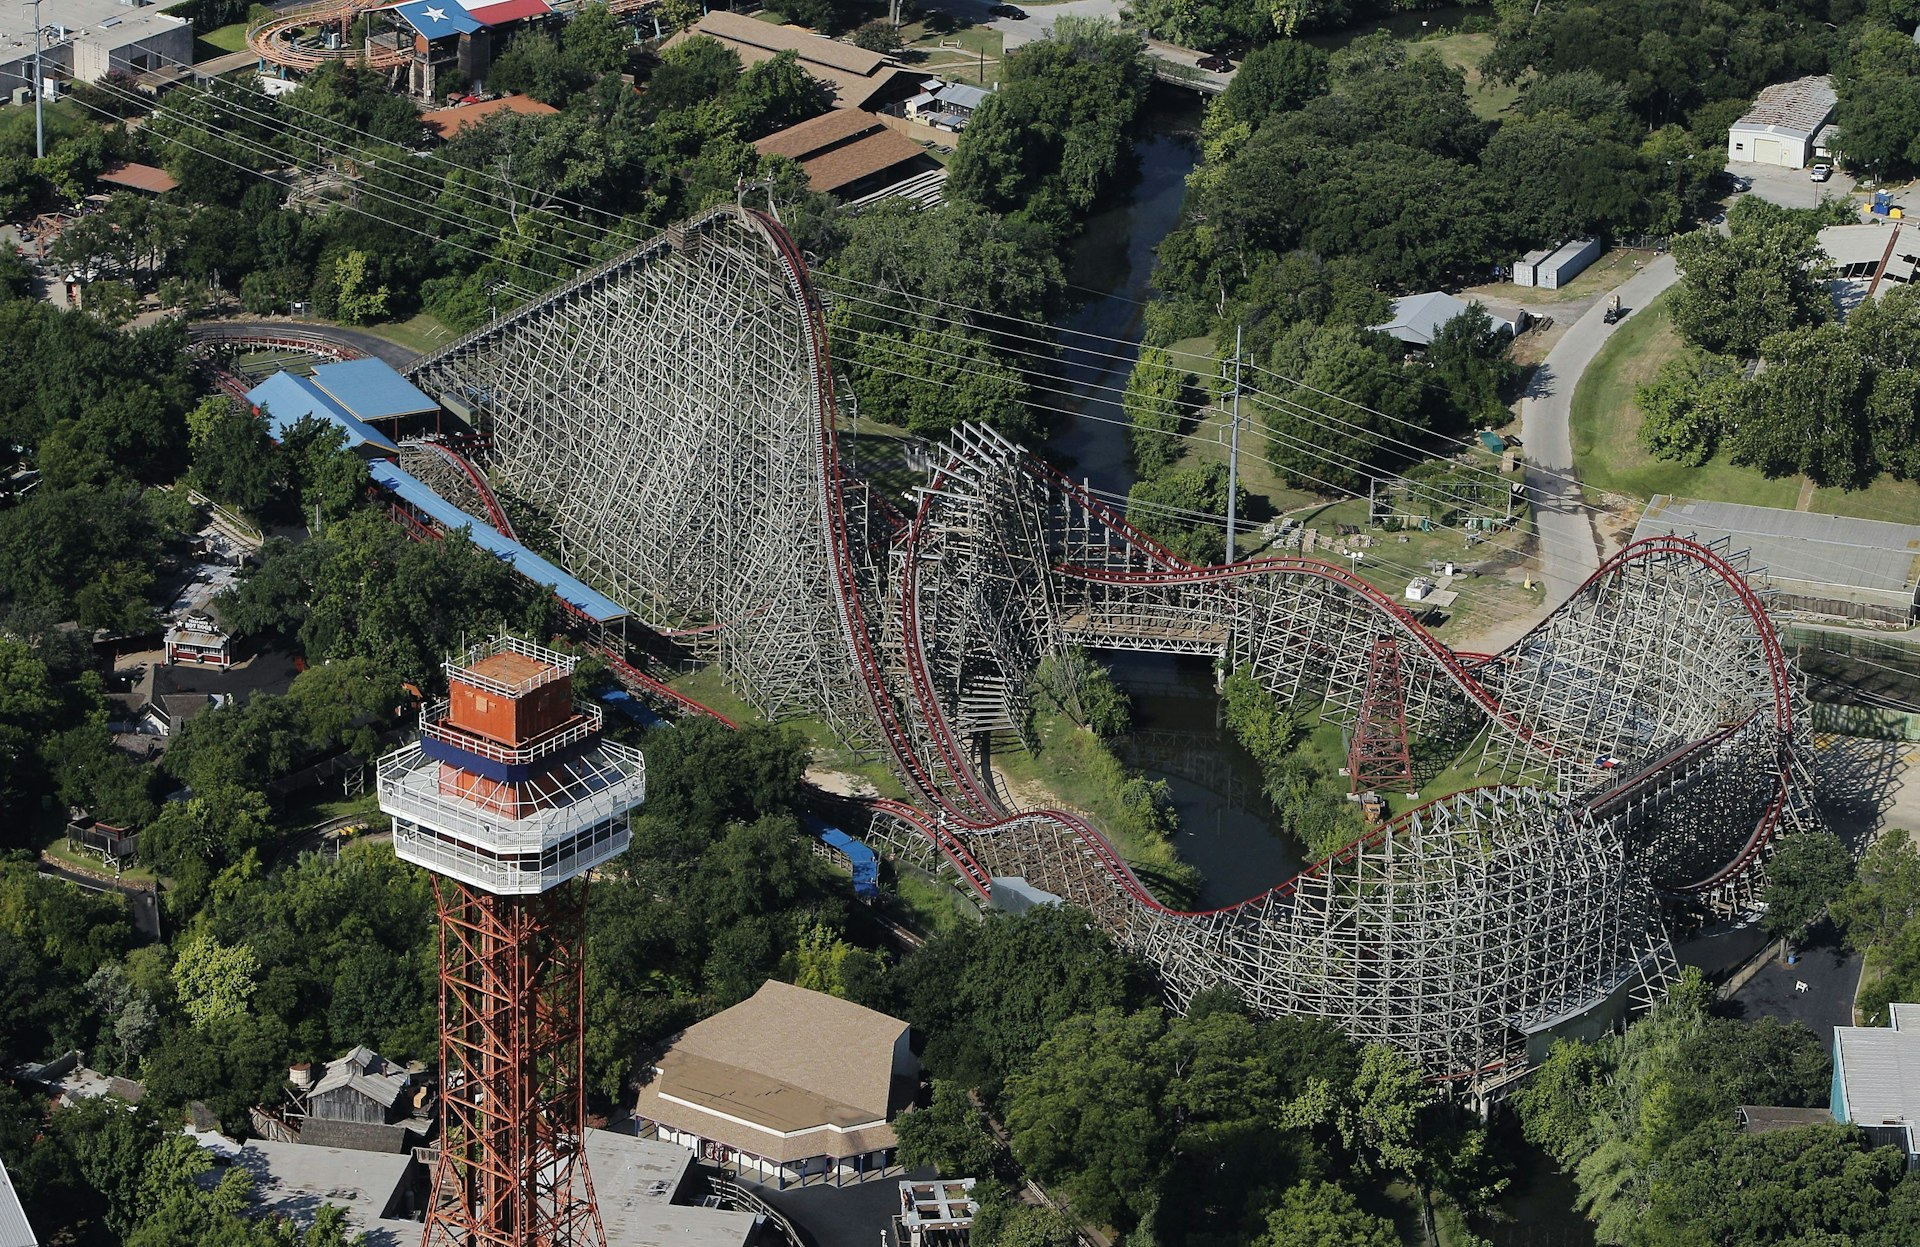 The texas giant rollercoaster at six flags over texas